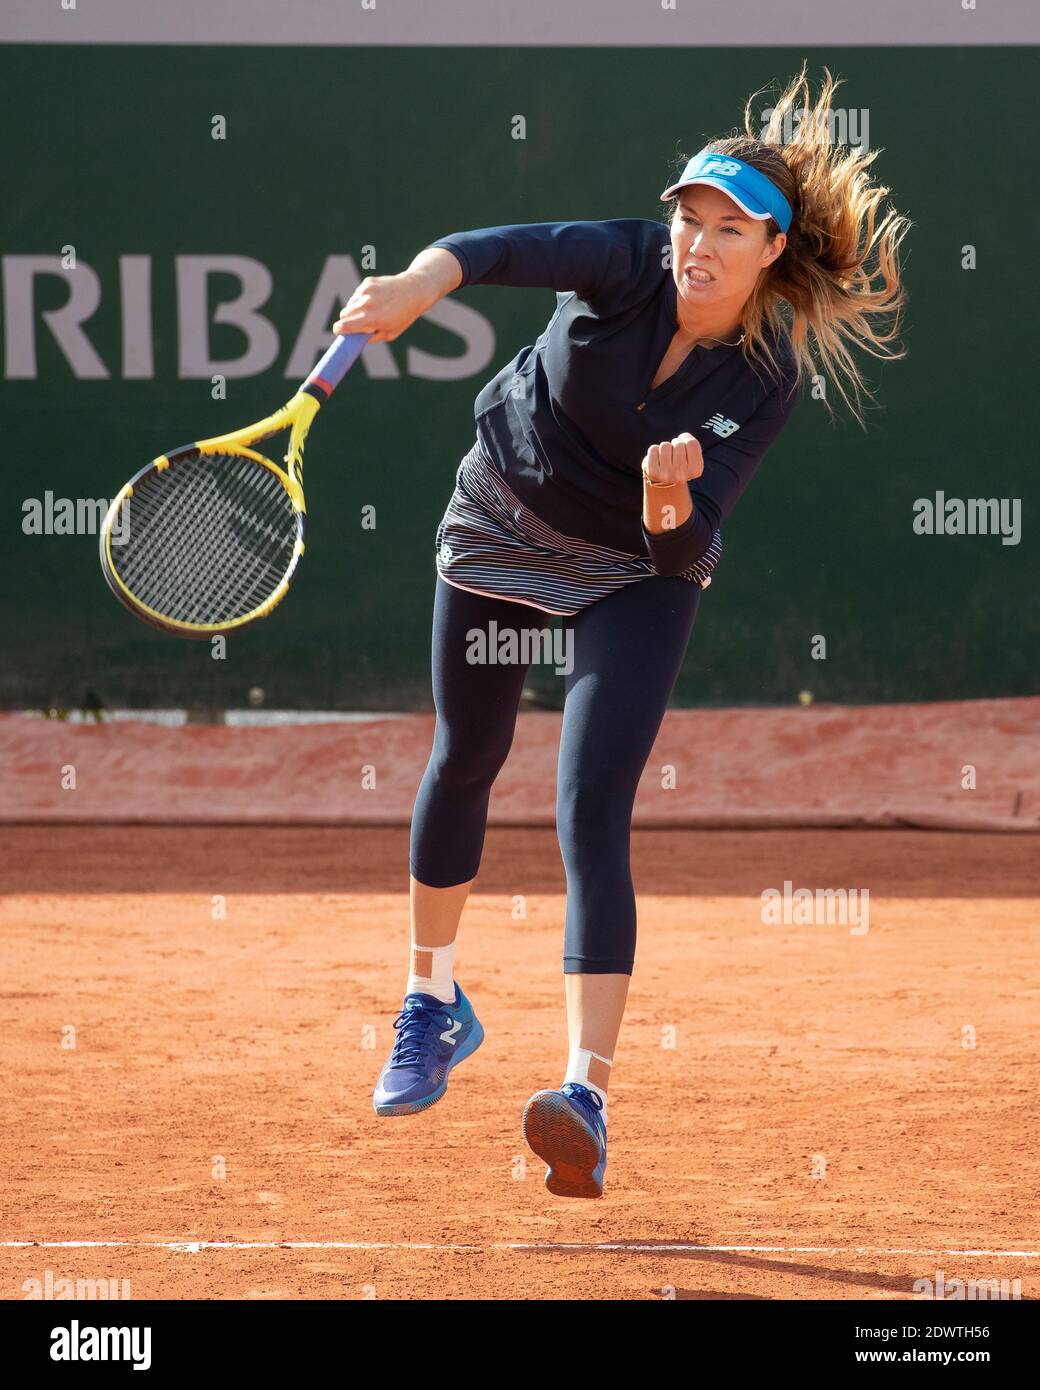 American tennis player Danielle Collins playing a serve during a match at French Open 2020, Paris, France, Europe. Stock Photo